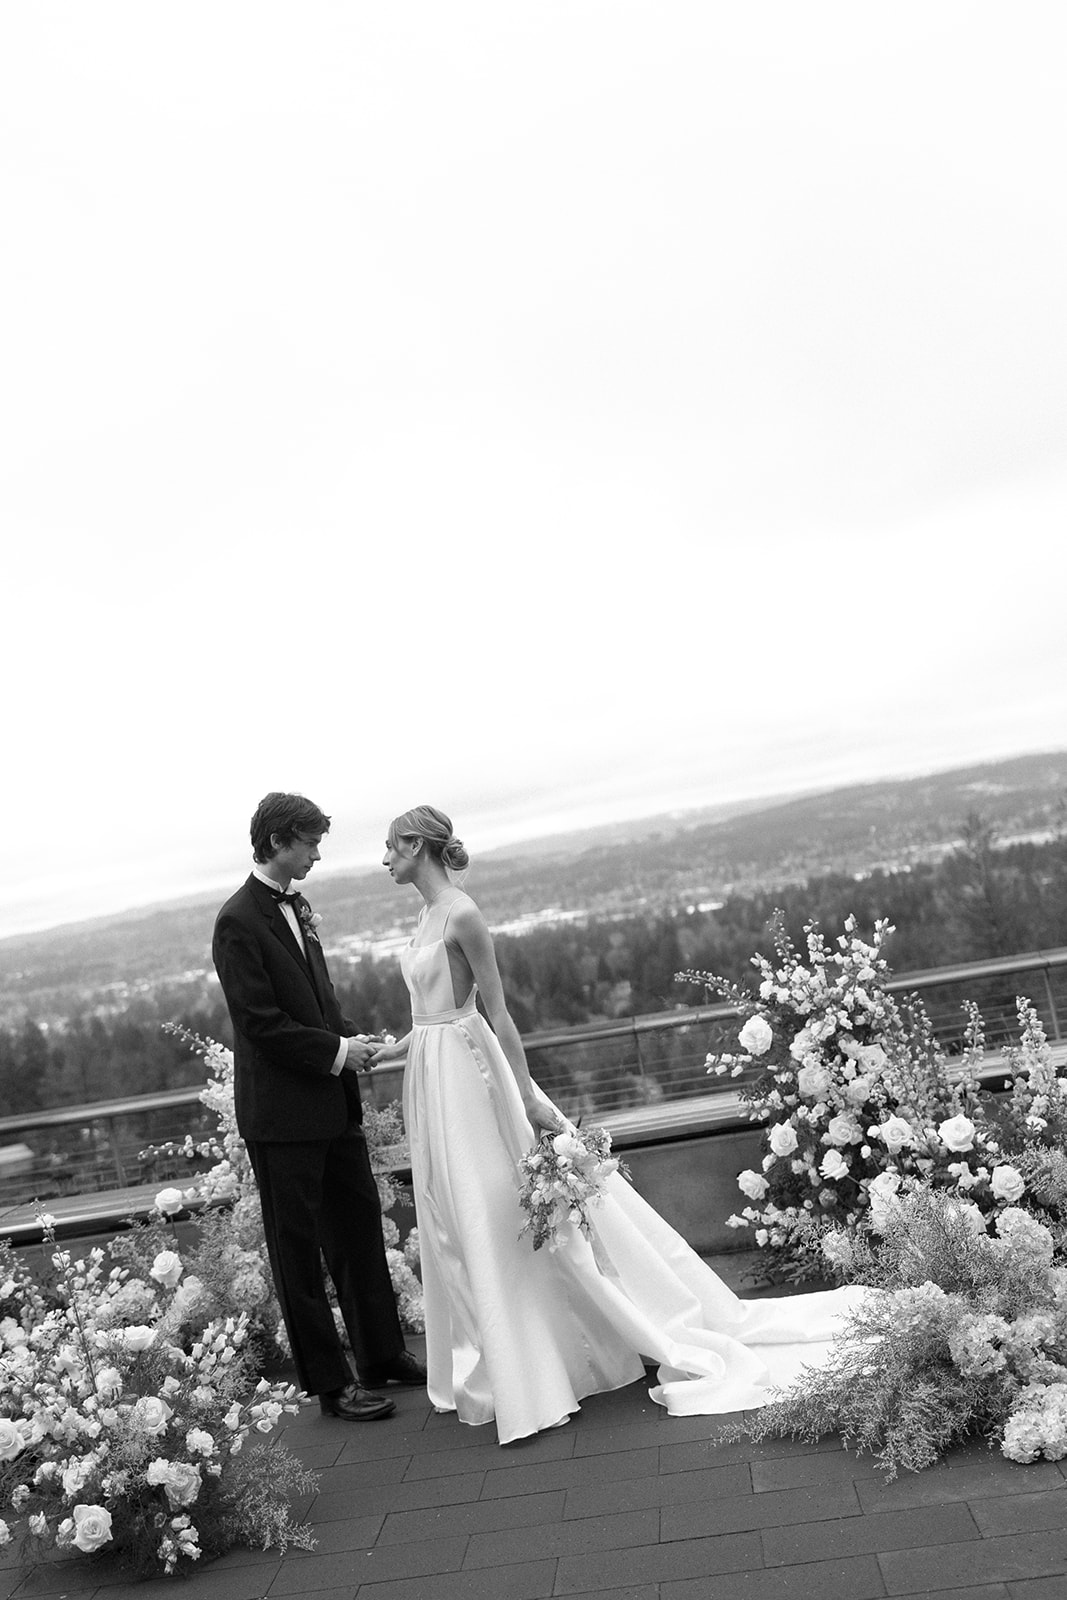 spring outdoor wedding ceremony black and white photo